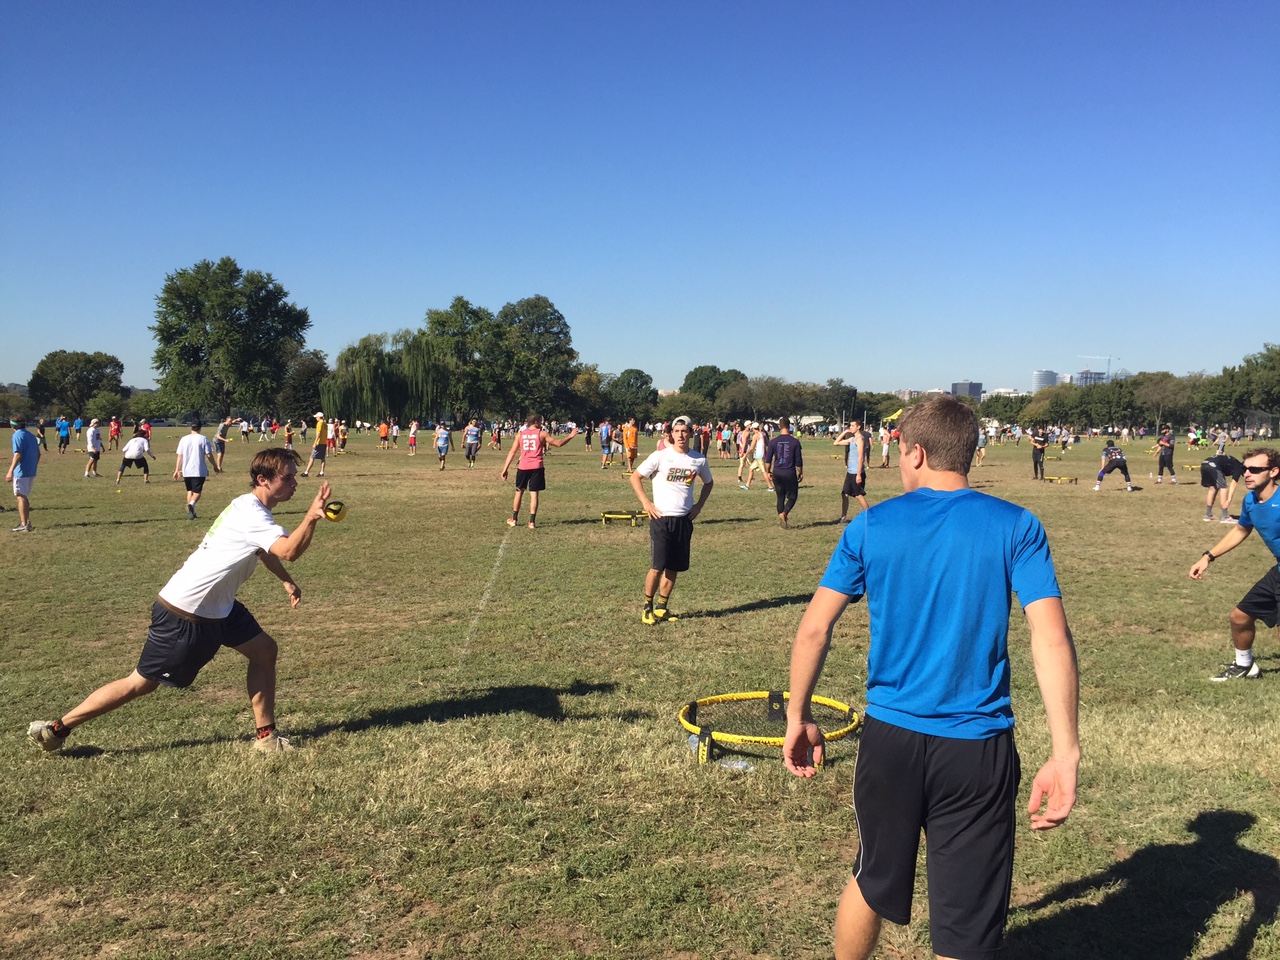 Roughly 500 athletes came out to West Potomac Park in Washington, D.C to compete in a Spikeball tournament on Saturday, Oct. 15, 2016. (WTOP/John Domen)